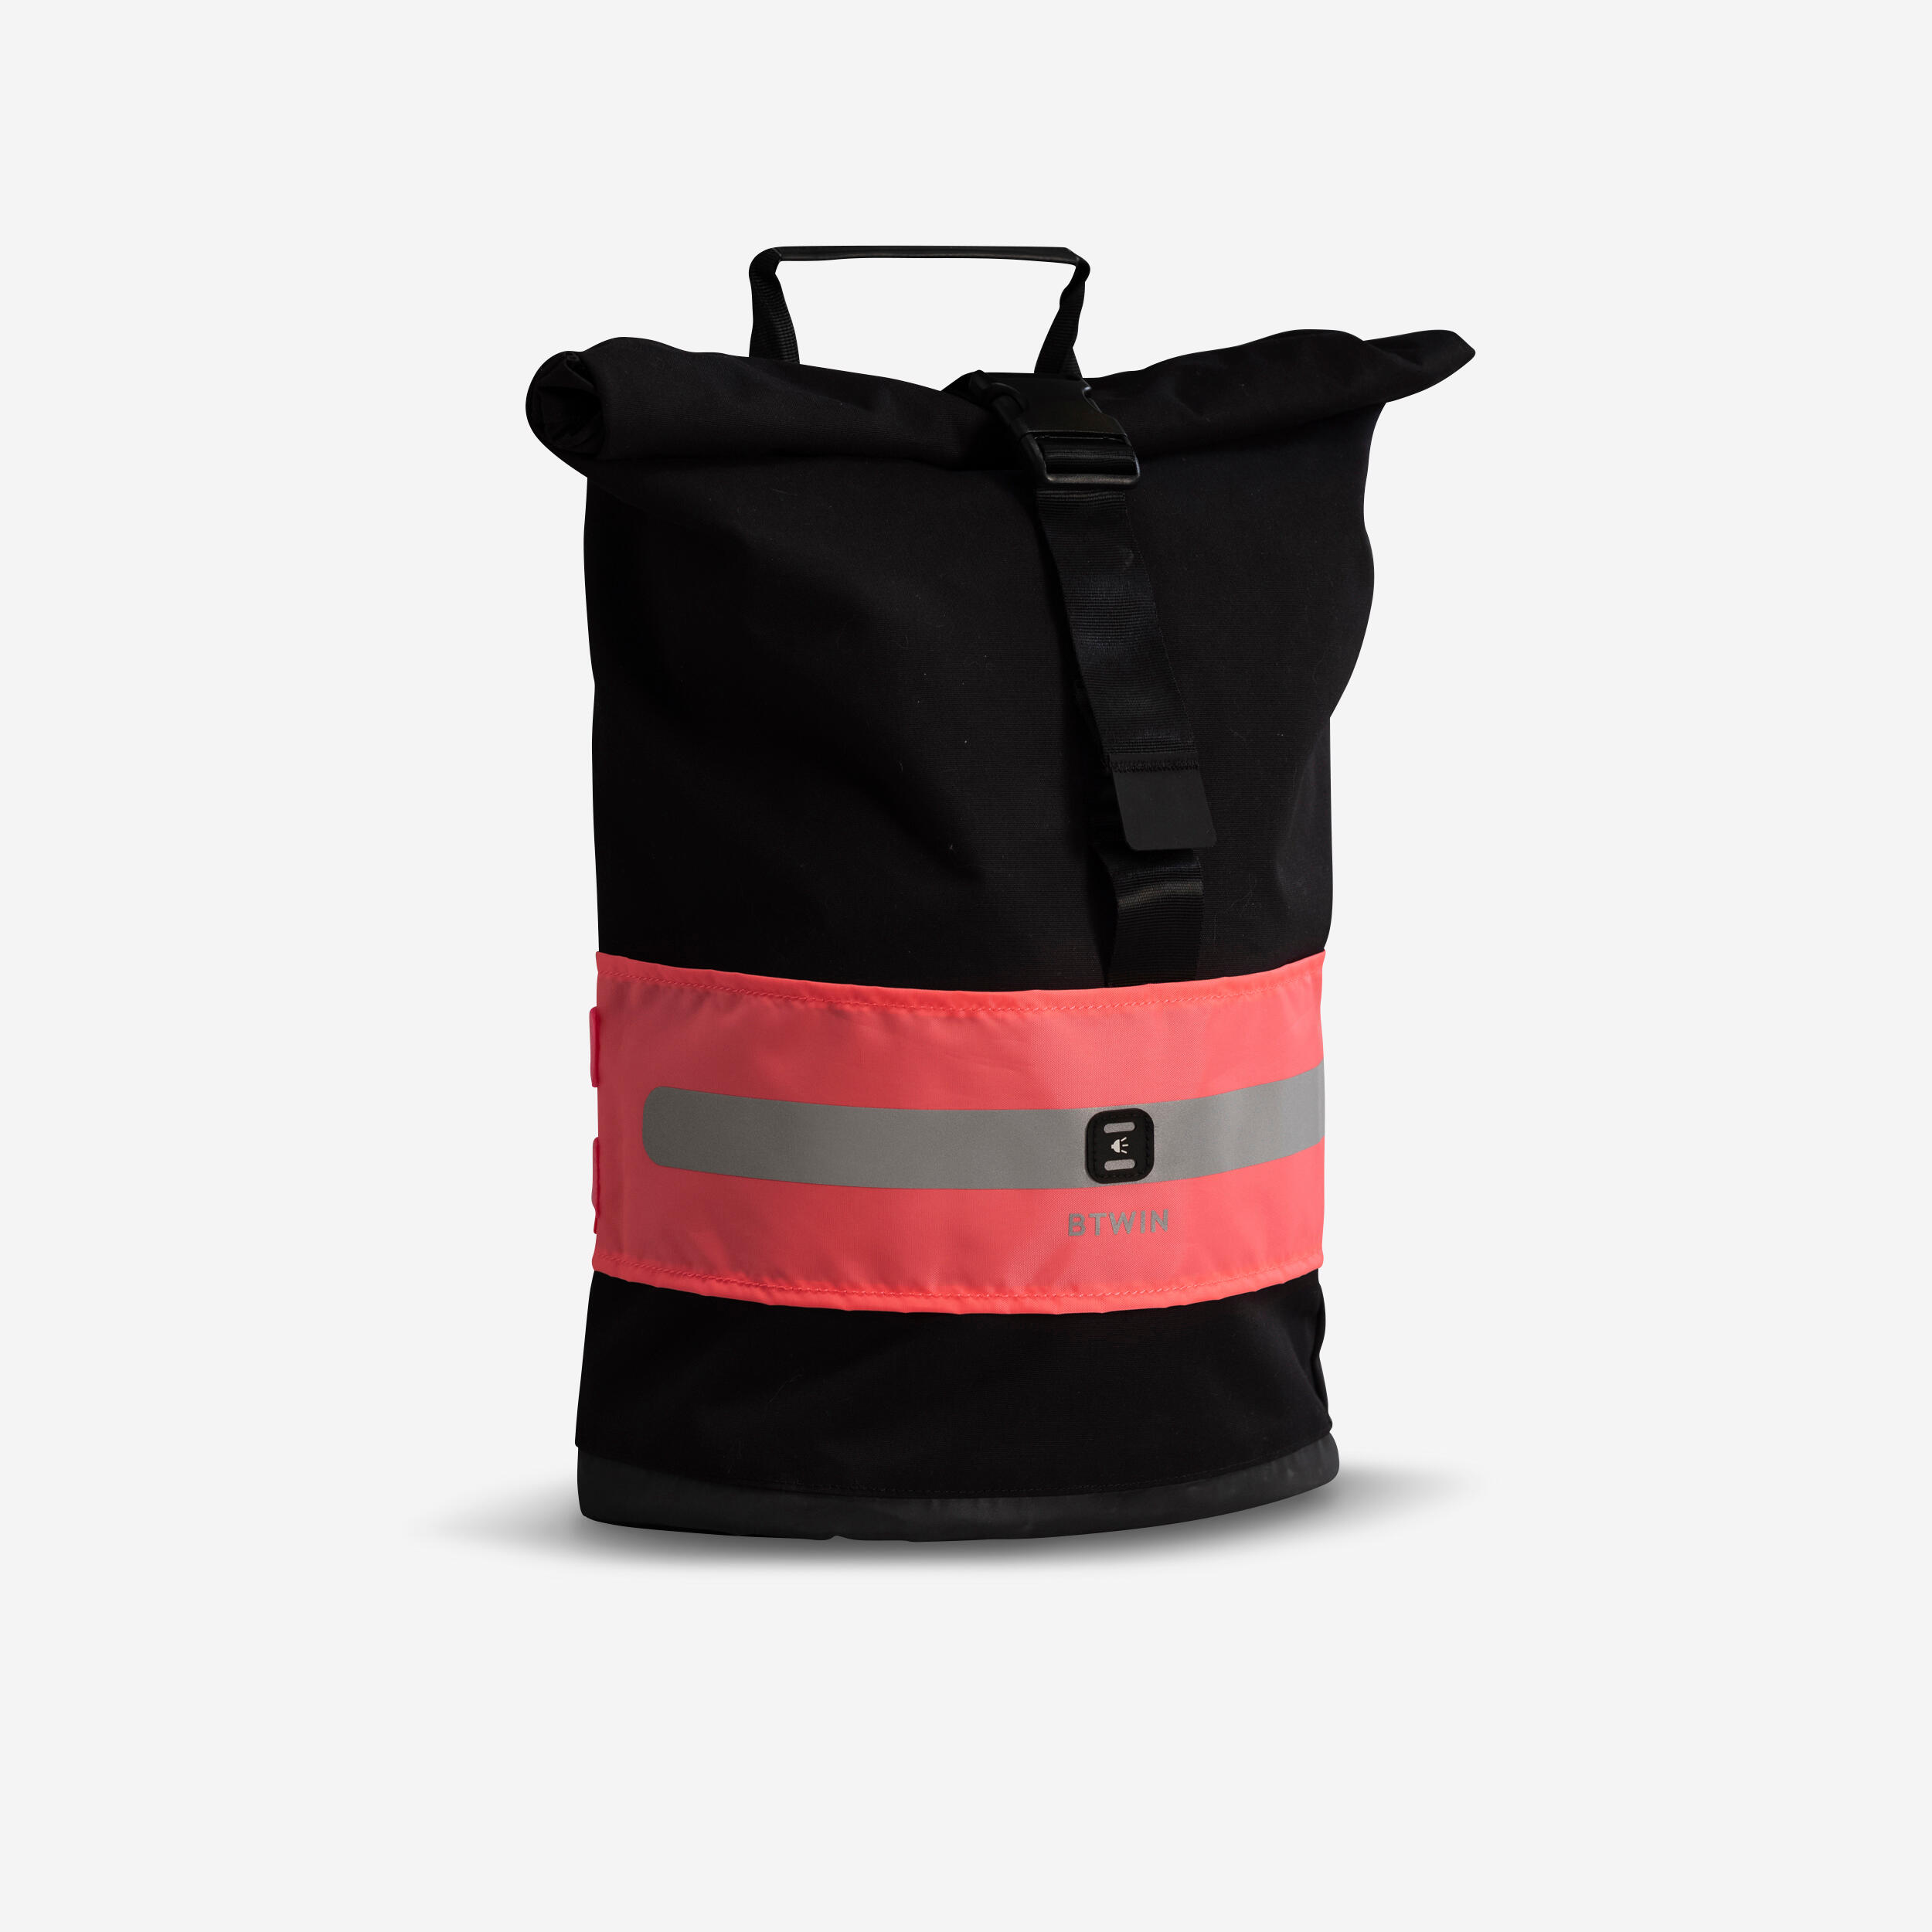 BTWIN Day and Night Visibility Bag Band - Neon Pink